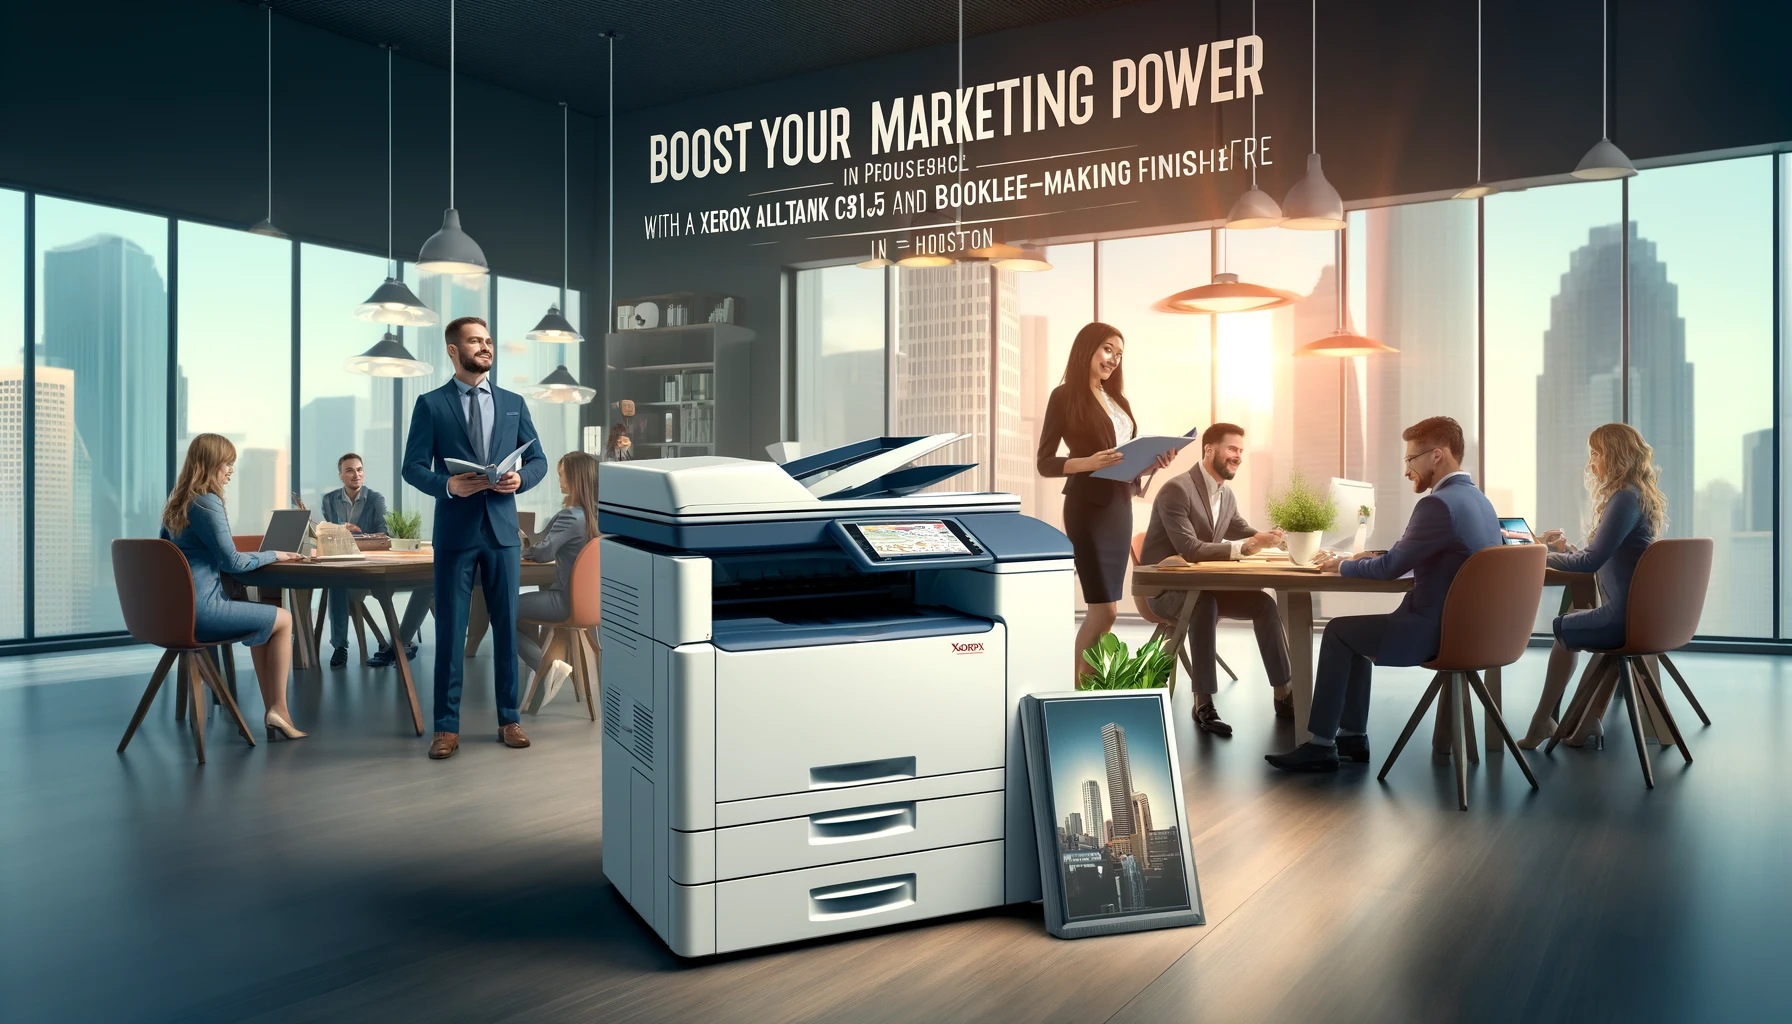 Marketing Power with a Xerox AltaLink C8155 and Booklet-Making Finisher